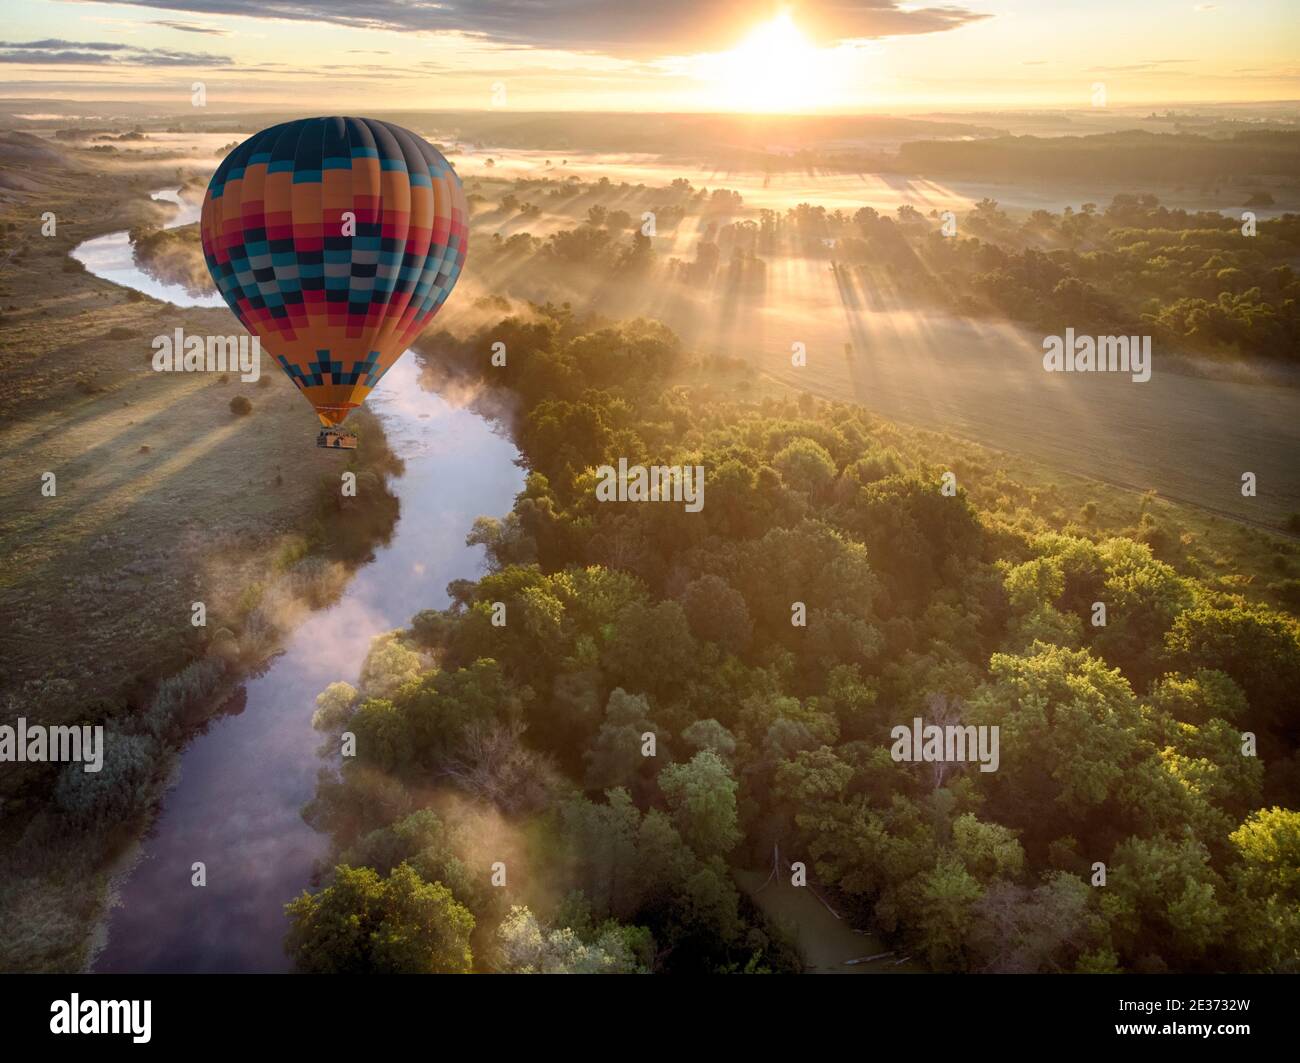 Hot air balloon over river on sunset. Travel, freedom, adventure, exploration, extreme concept. Stock Photo